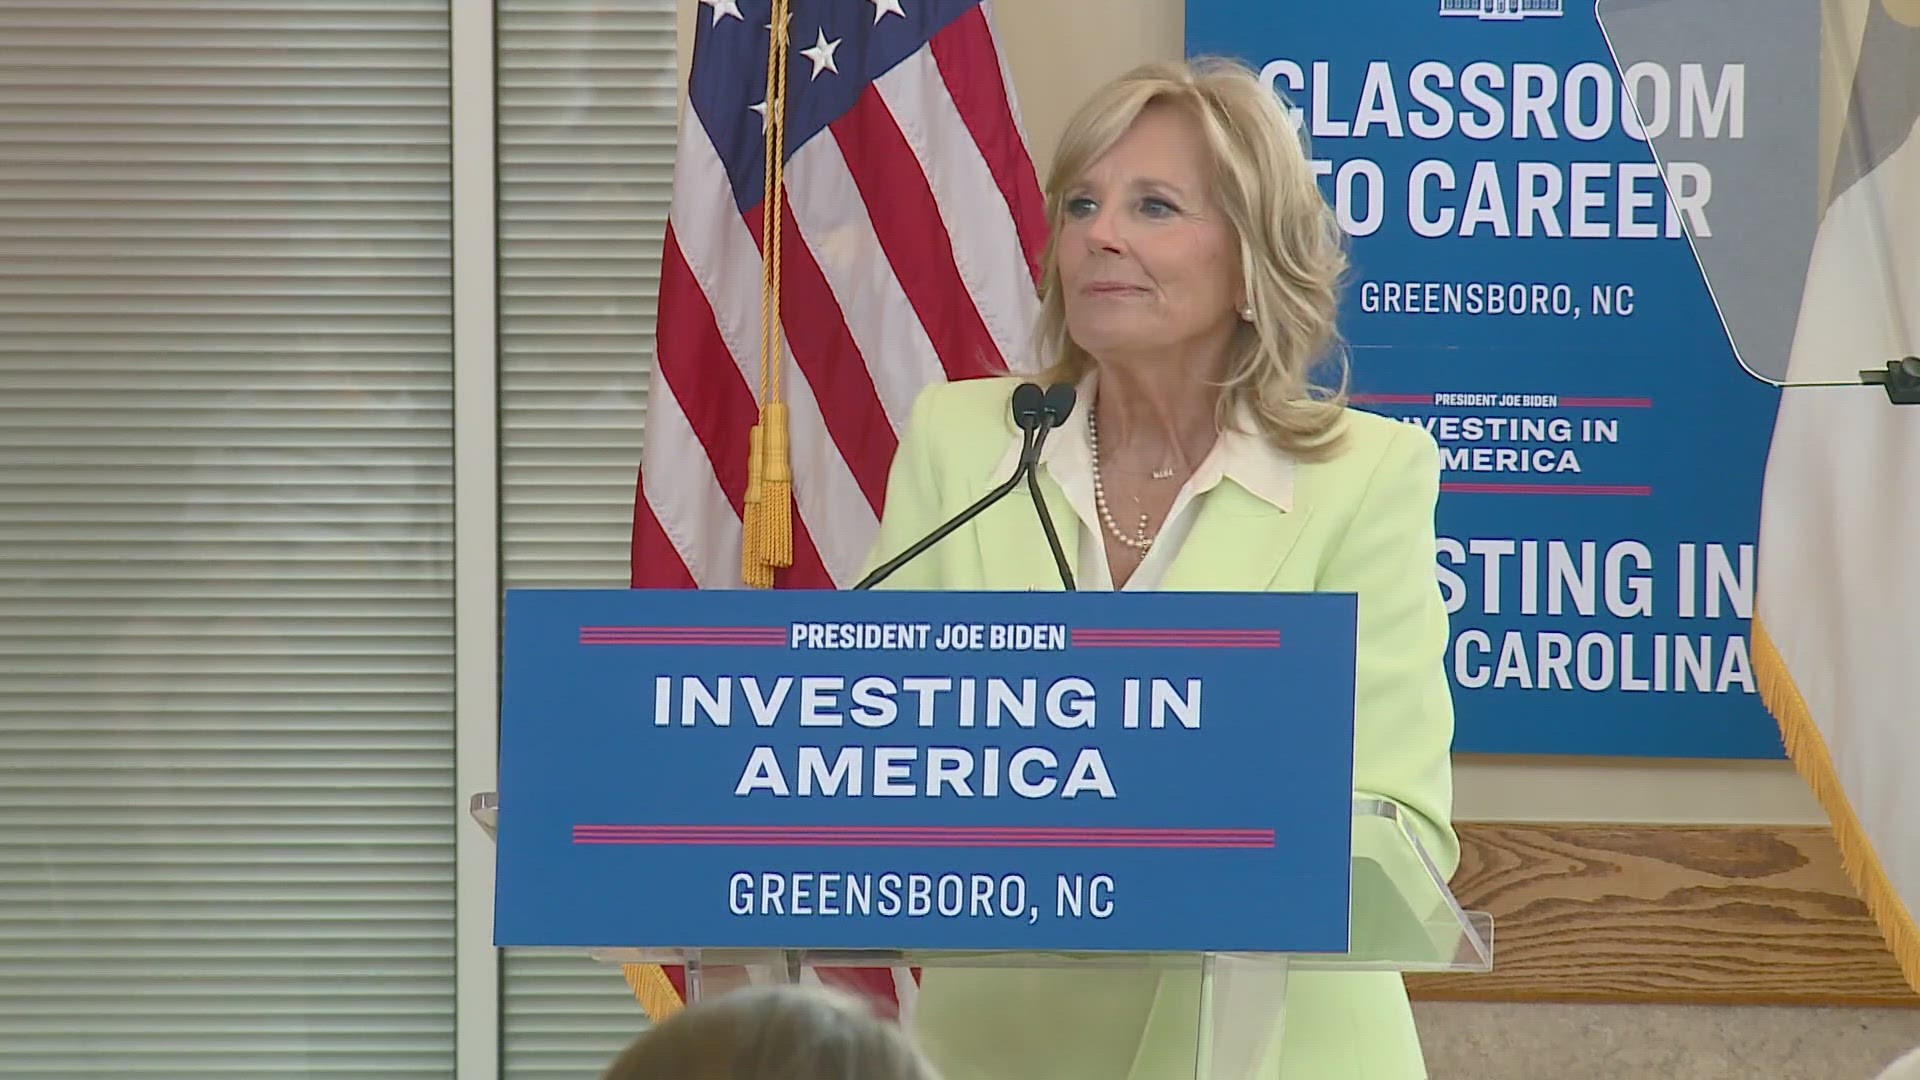 Dr. Biden discussed programs that will help students find a job after graduation.